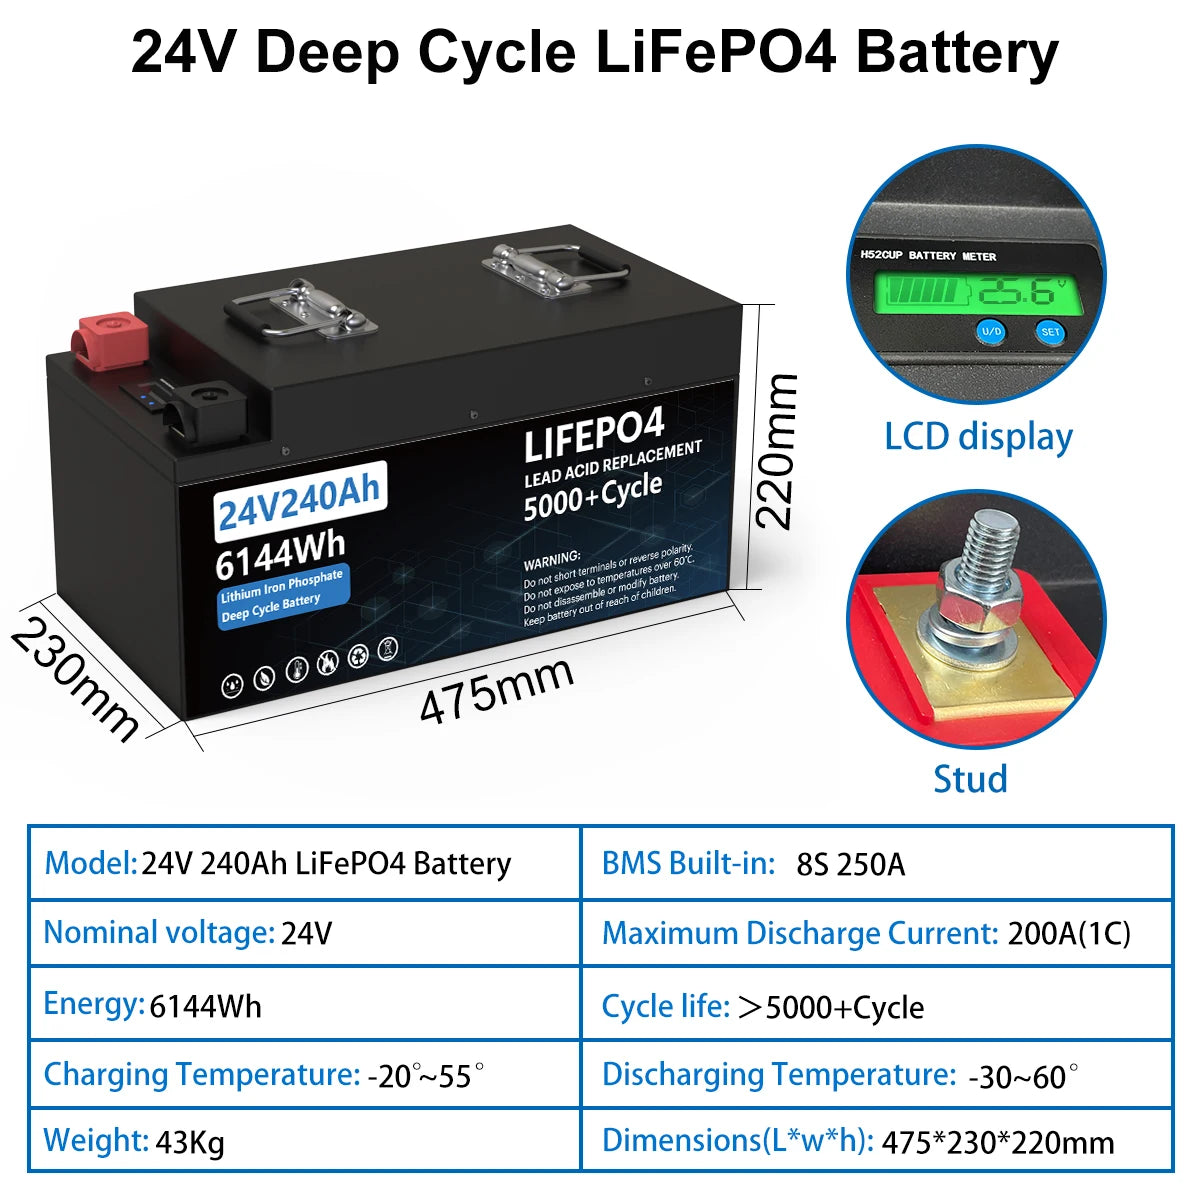 LiFePO4 24V 200AH Battery, 24V 200AH lithium iron phosphate battery pack with built-in 200A BMS for RV or boat use, no tax.